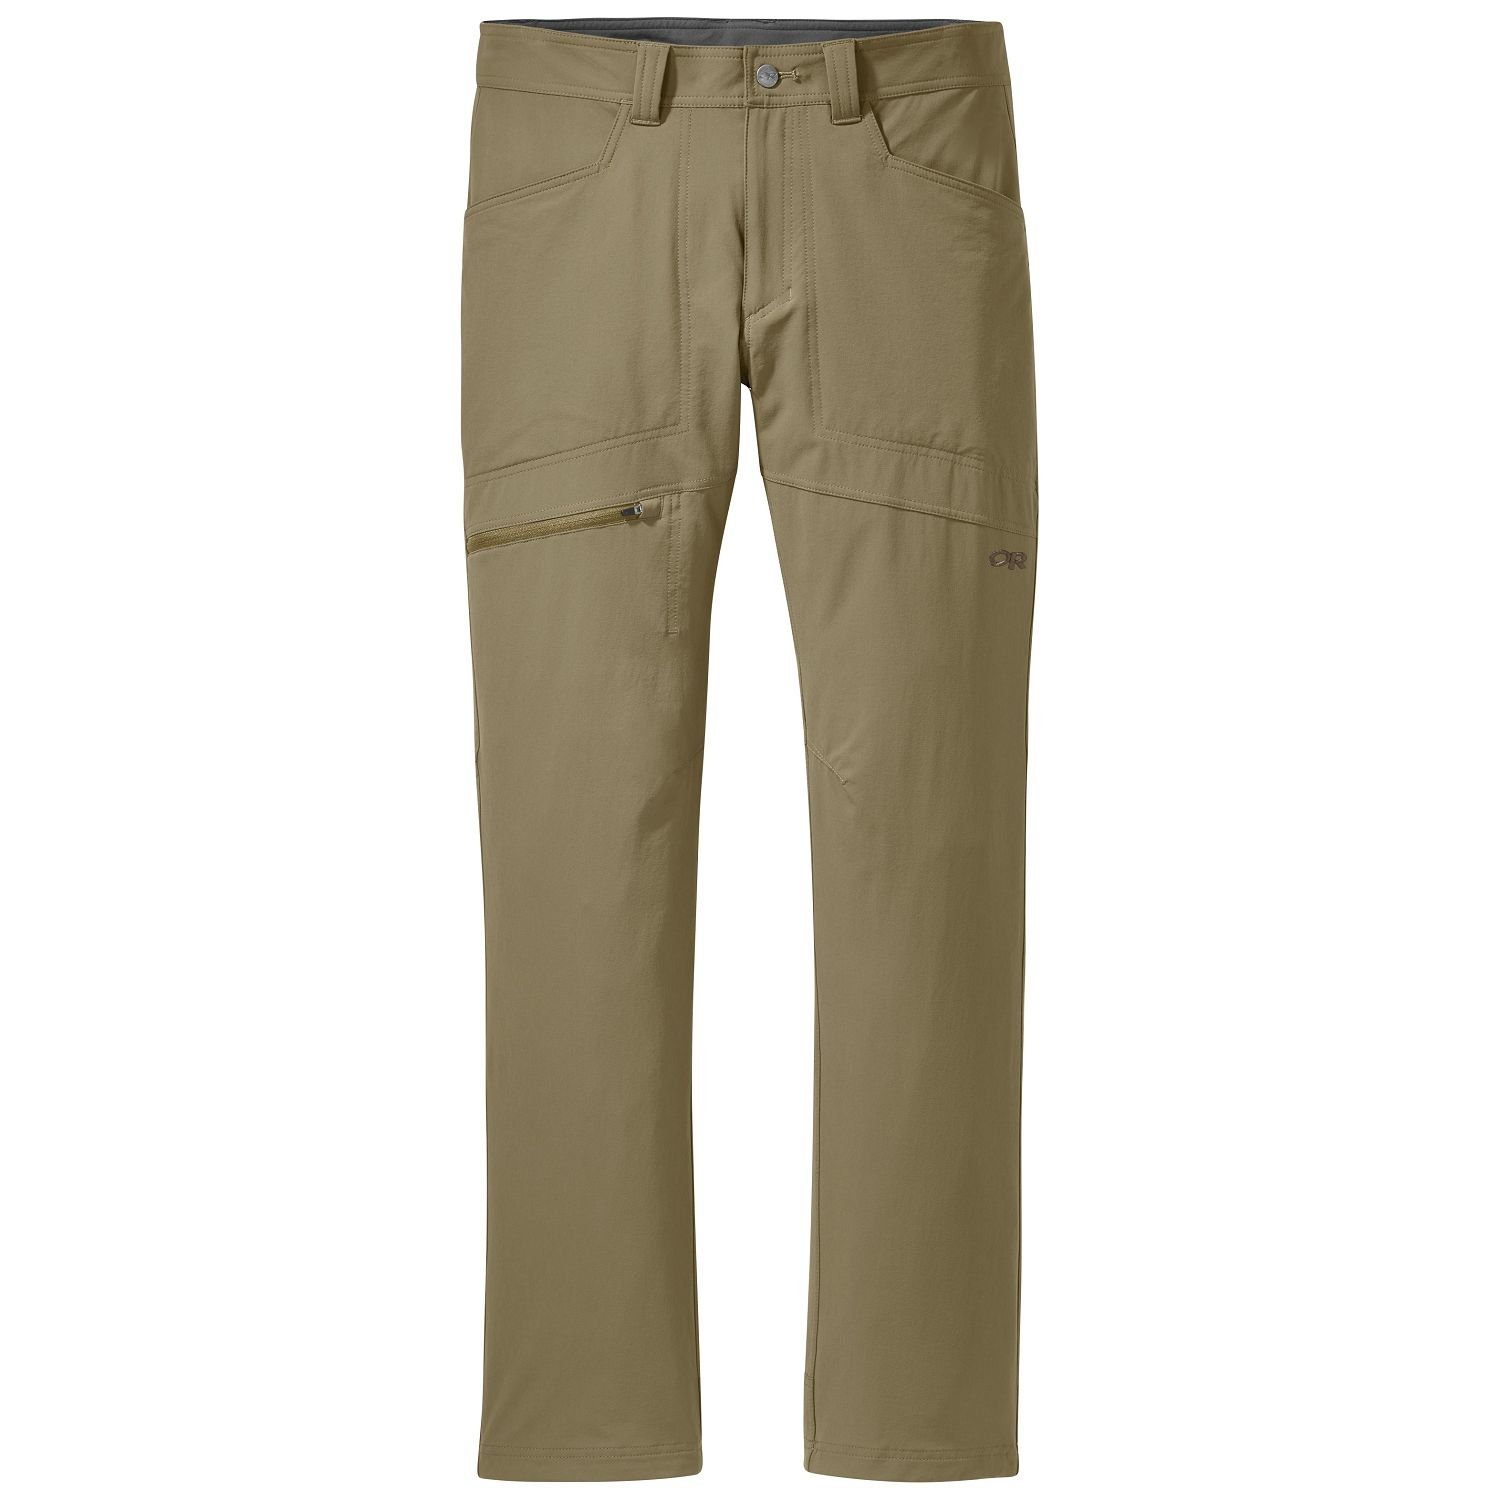 Outdoor Research Outdoor Laufhose Research Pants - braun (1-tlg) Men's Voodoo 32"